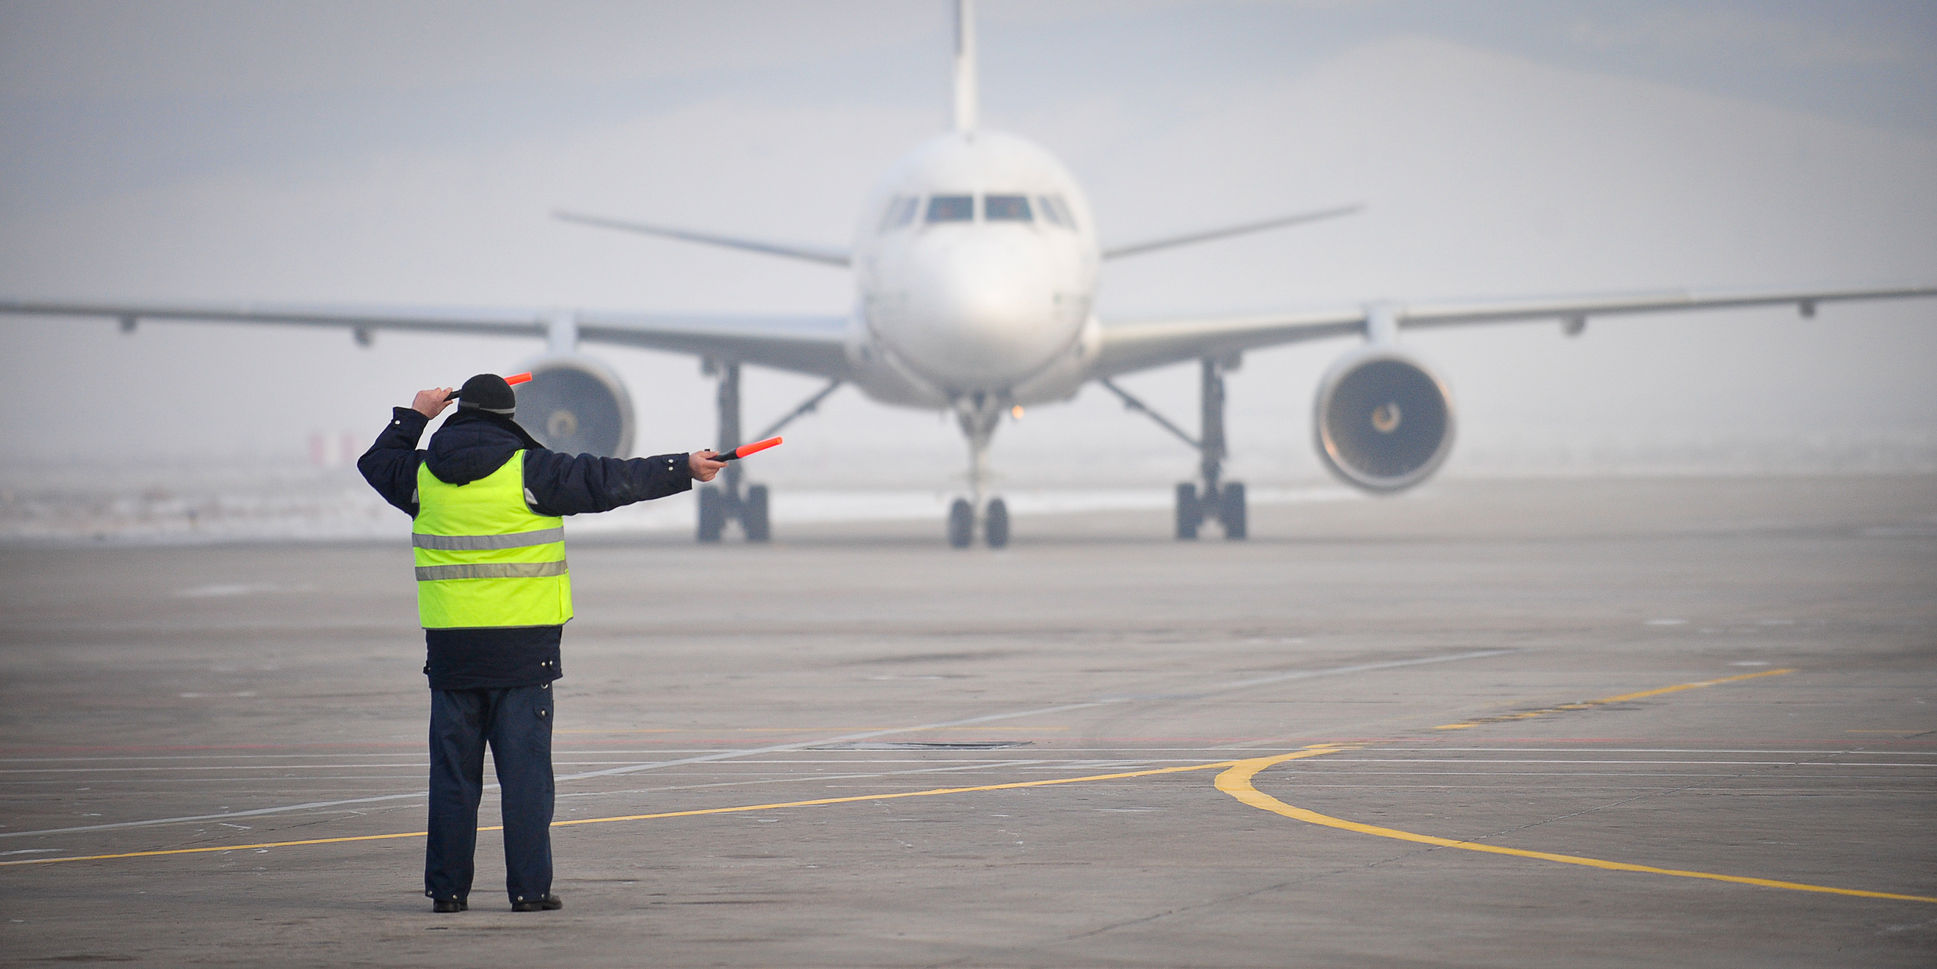 airport worker directing an airplane as it arrived